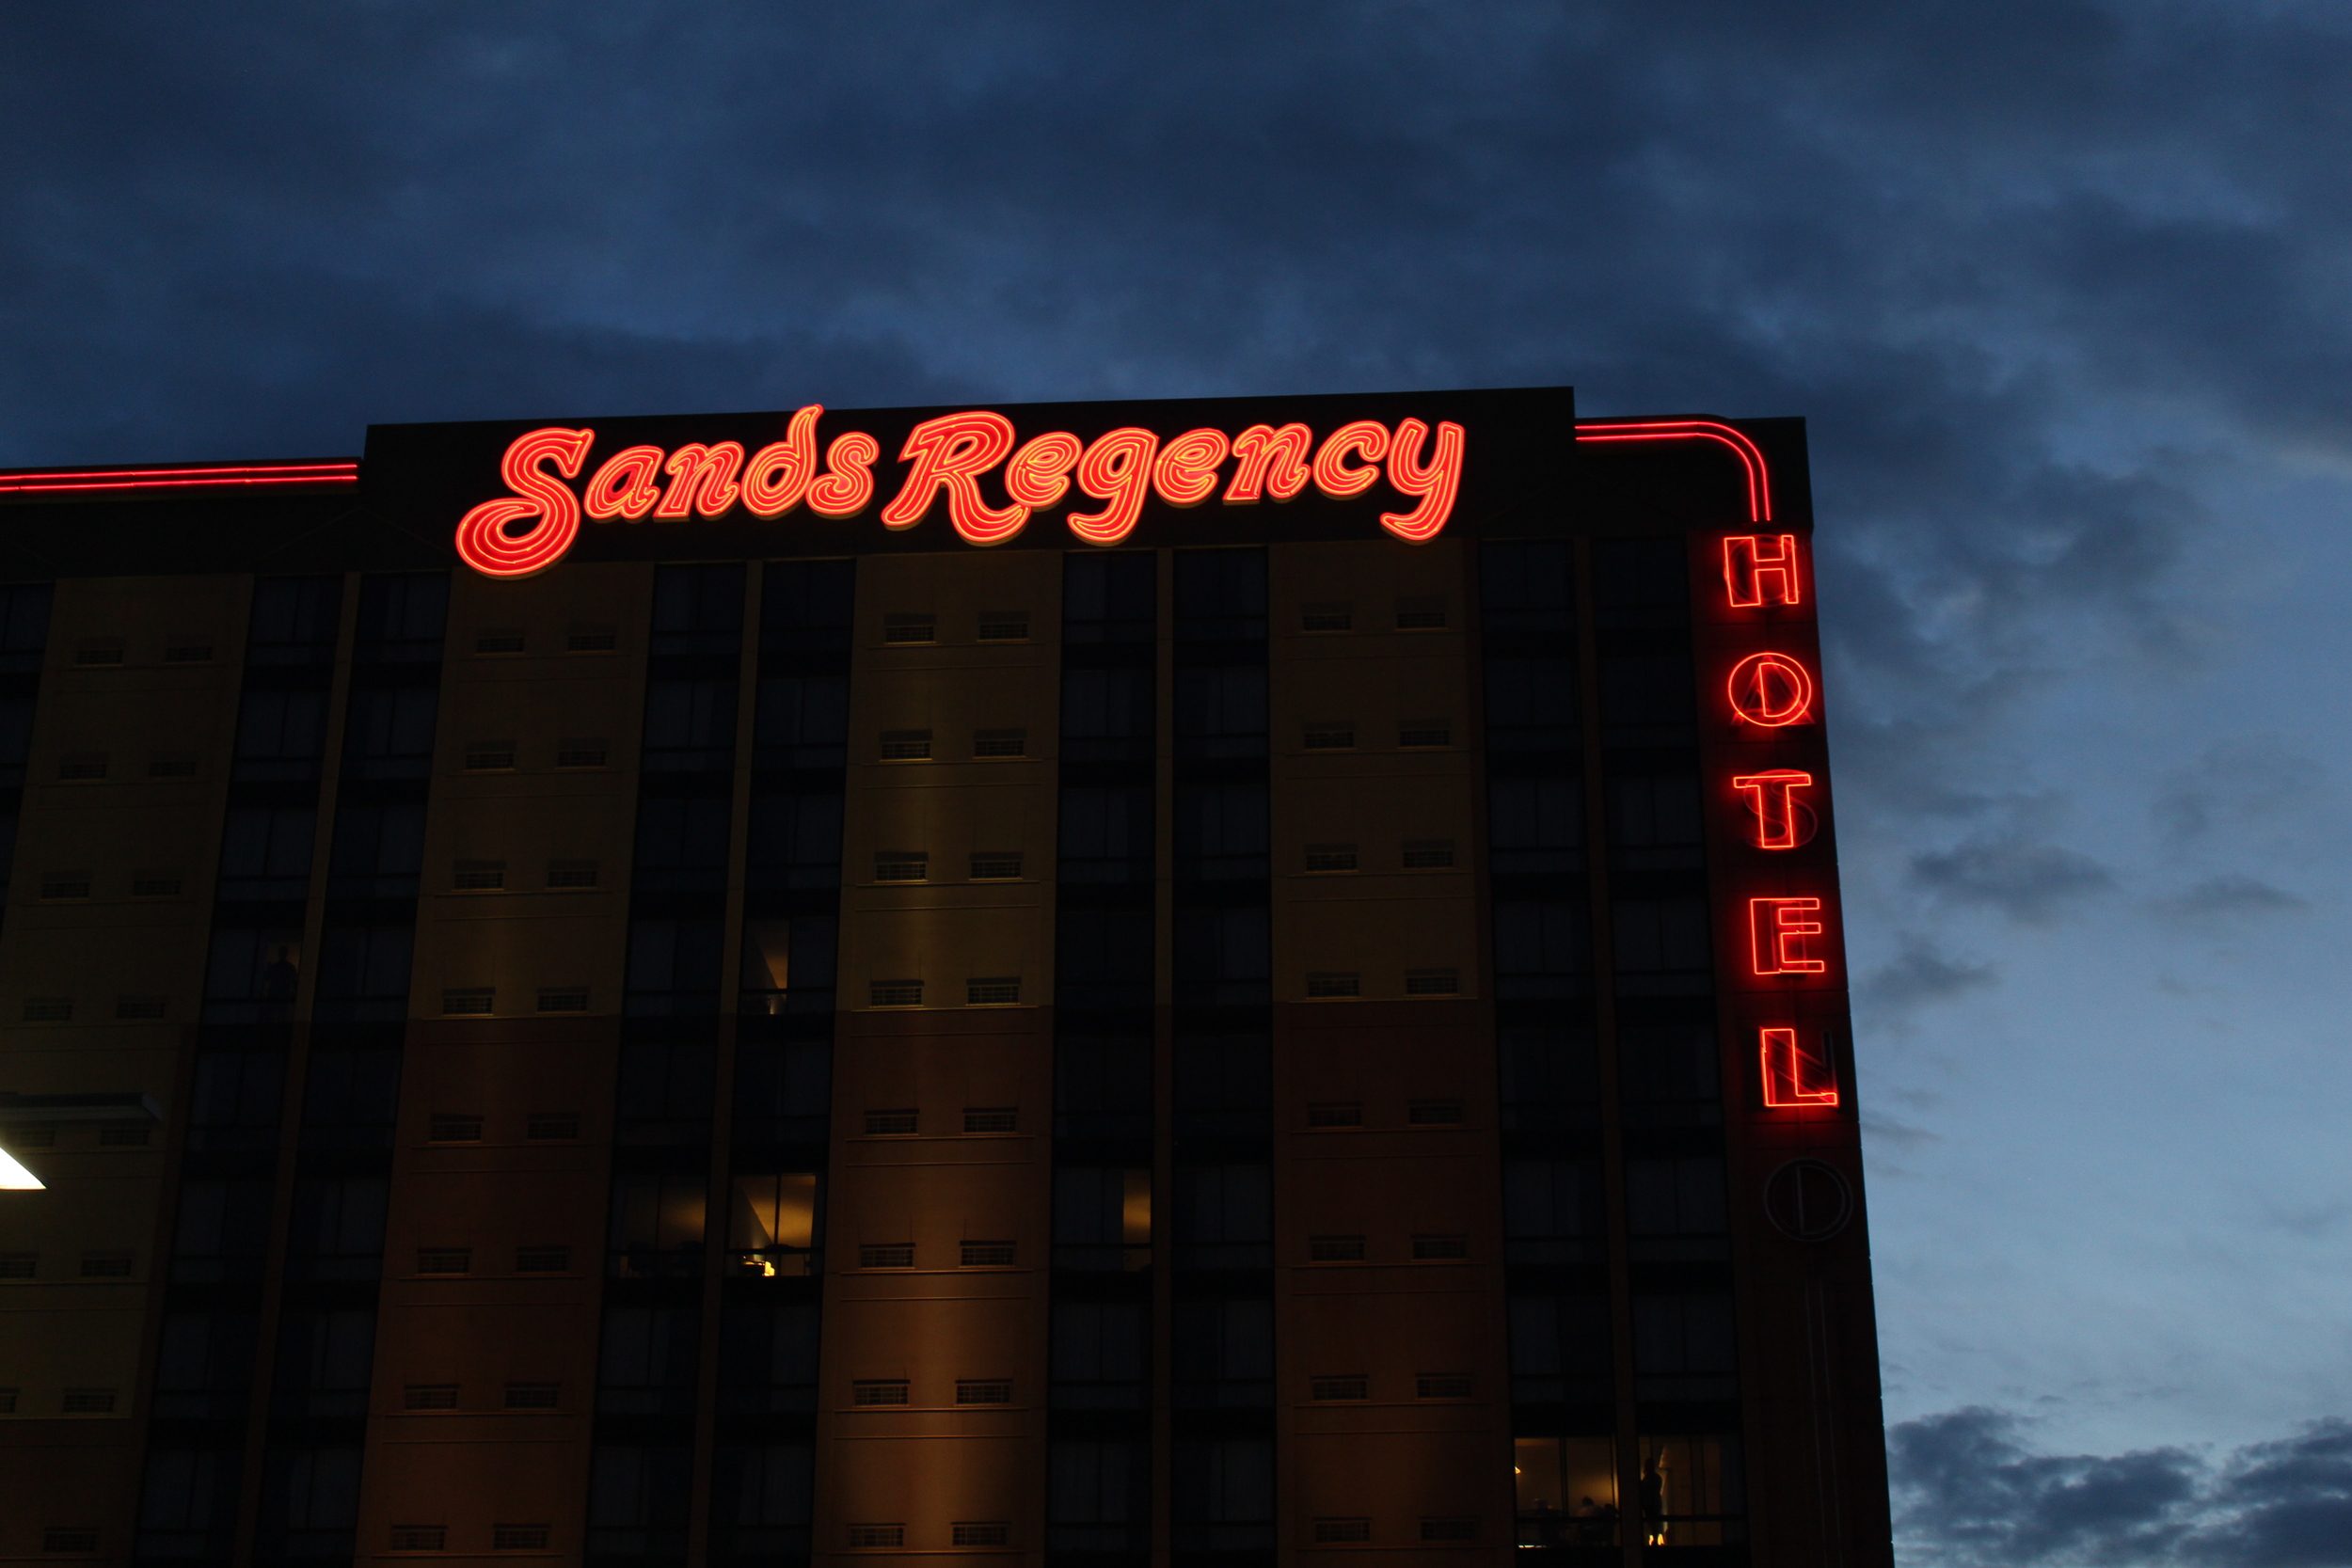 Sands Regency wall mounted signs, Reno, Nevada: photographic print